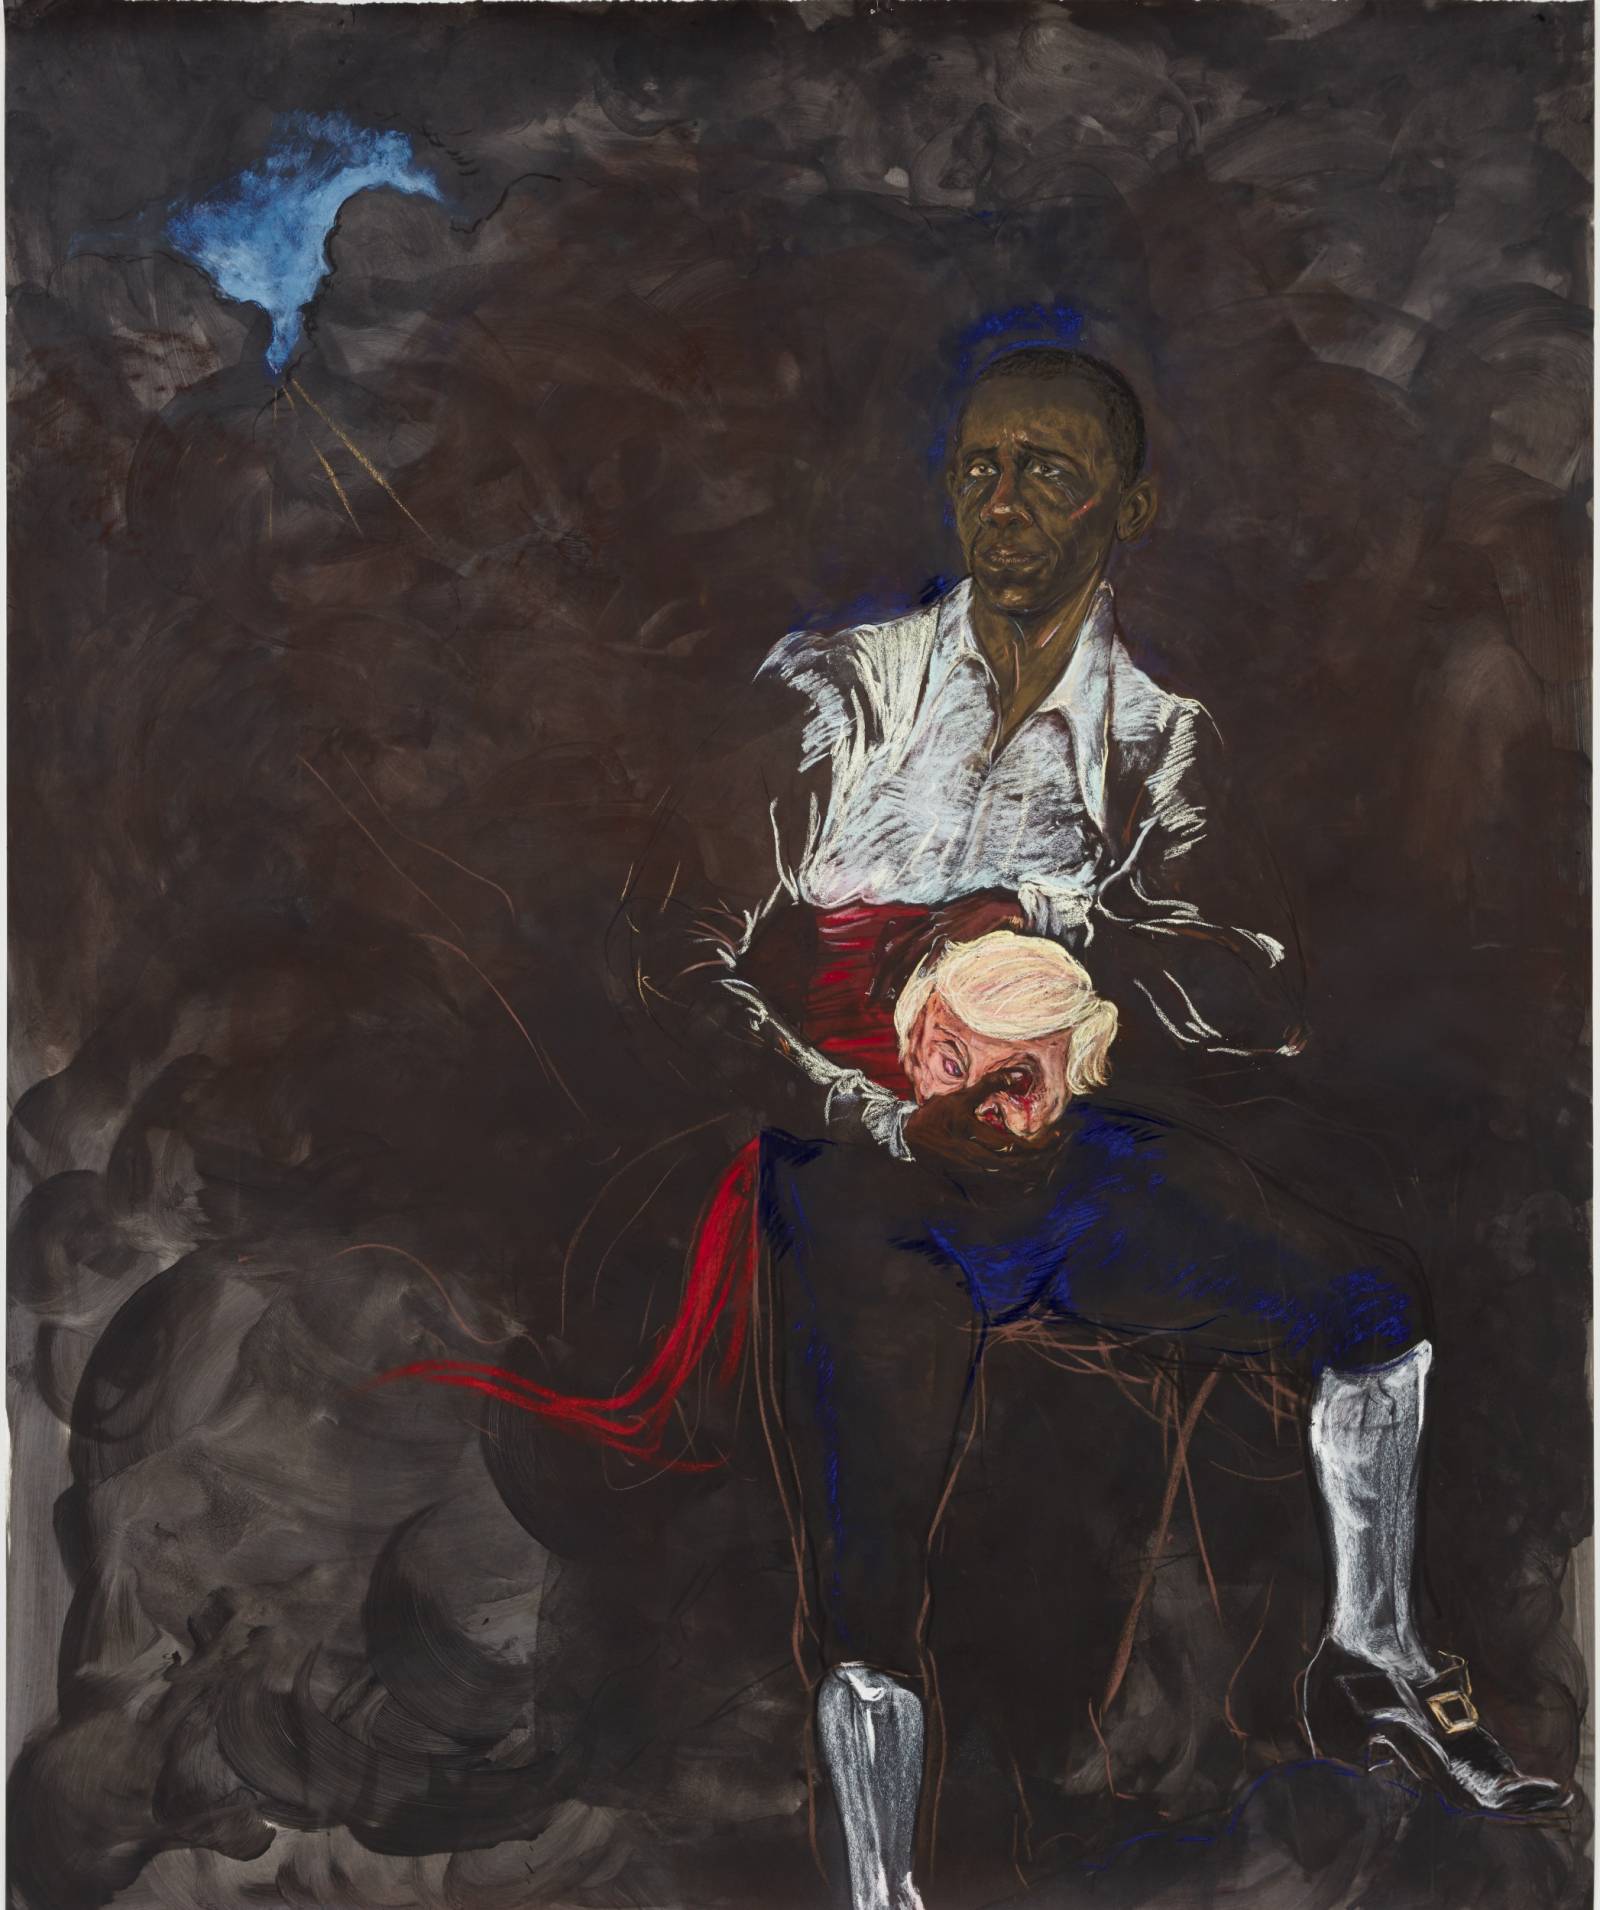 Kara Walker; Barack Obama as Othello The Moor With the Severed Head of Iago in a New and Revised Ending by Kara E. Walker; 2019